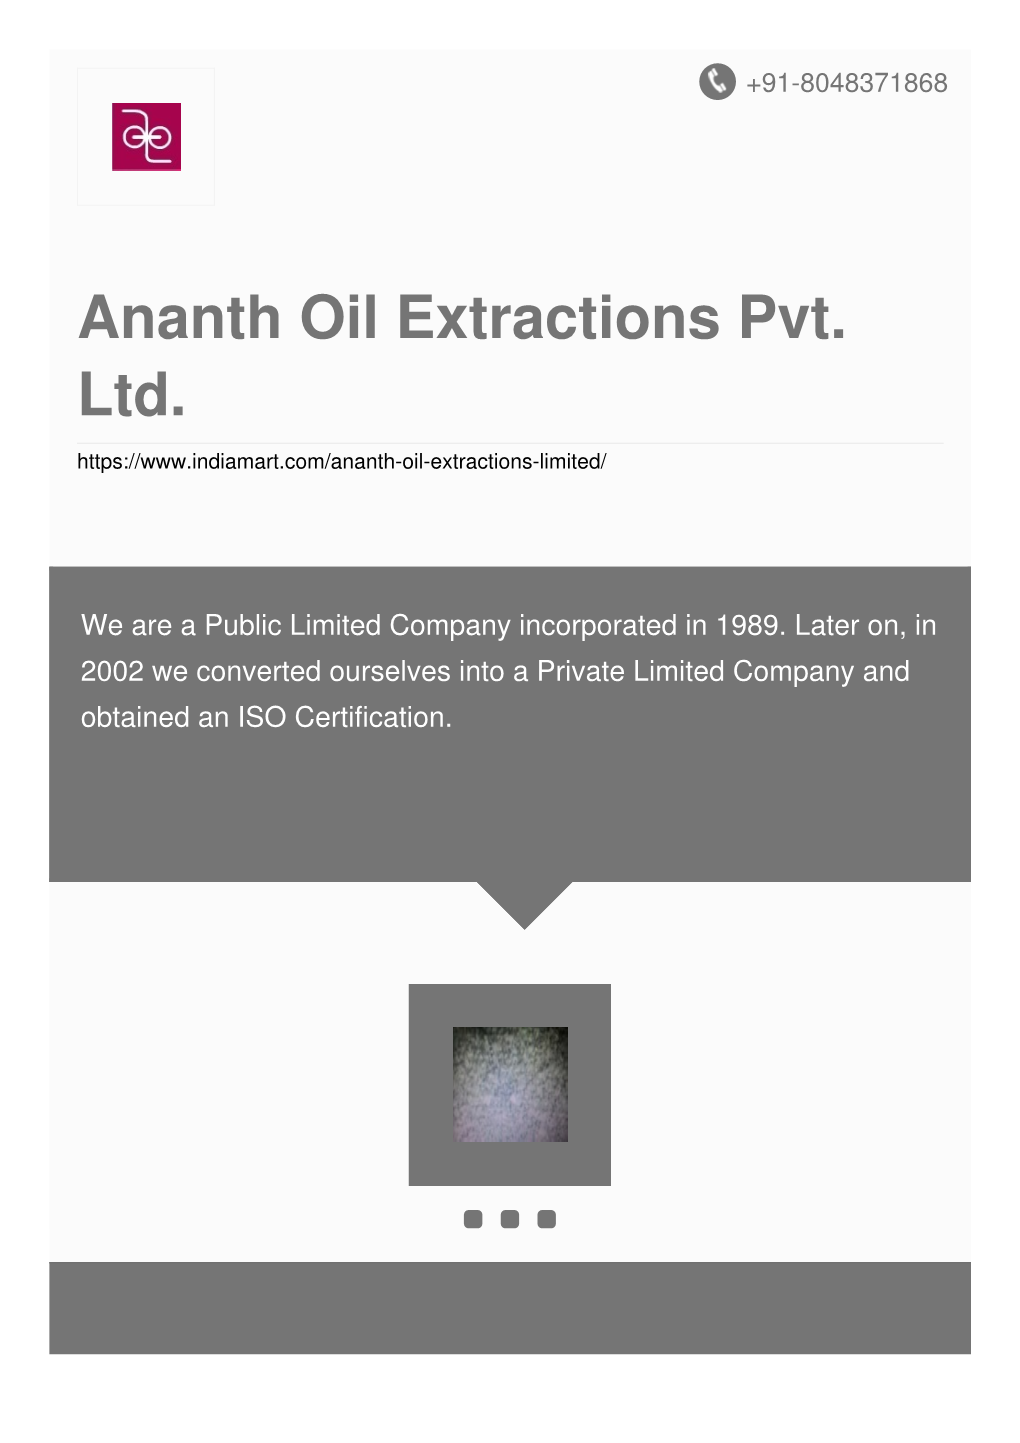 Ananth Oil Extractions Pvt. Ltd